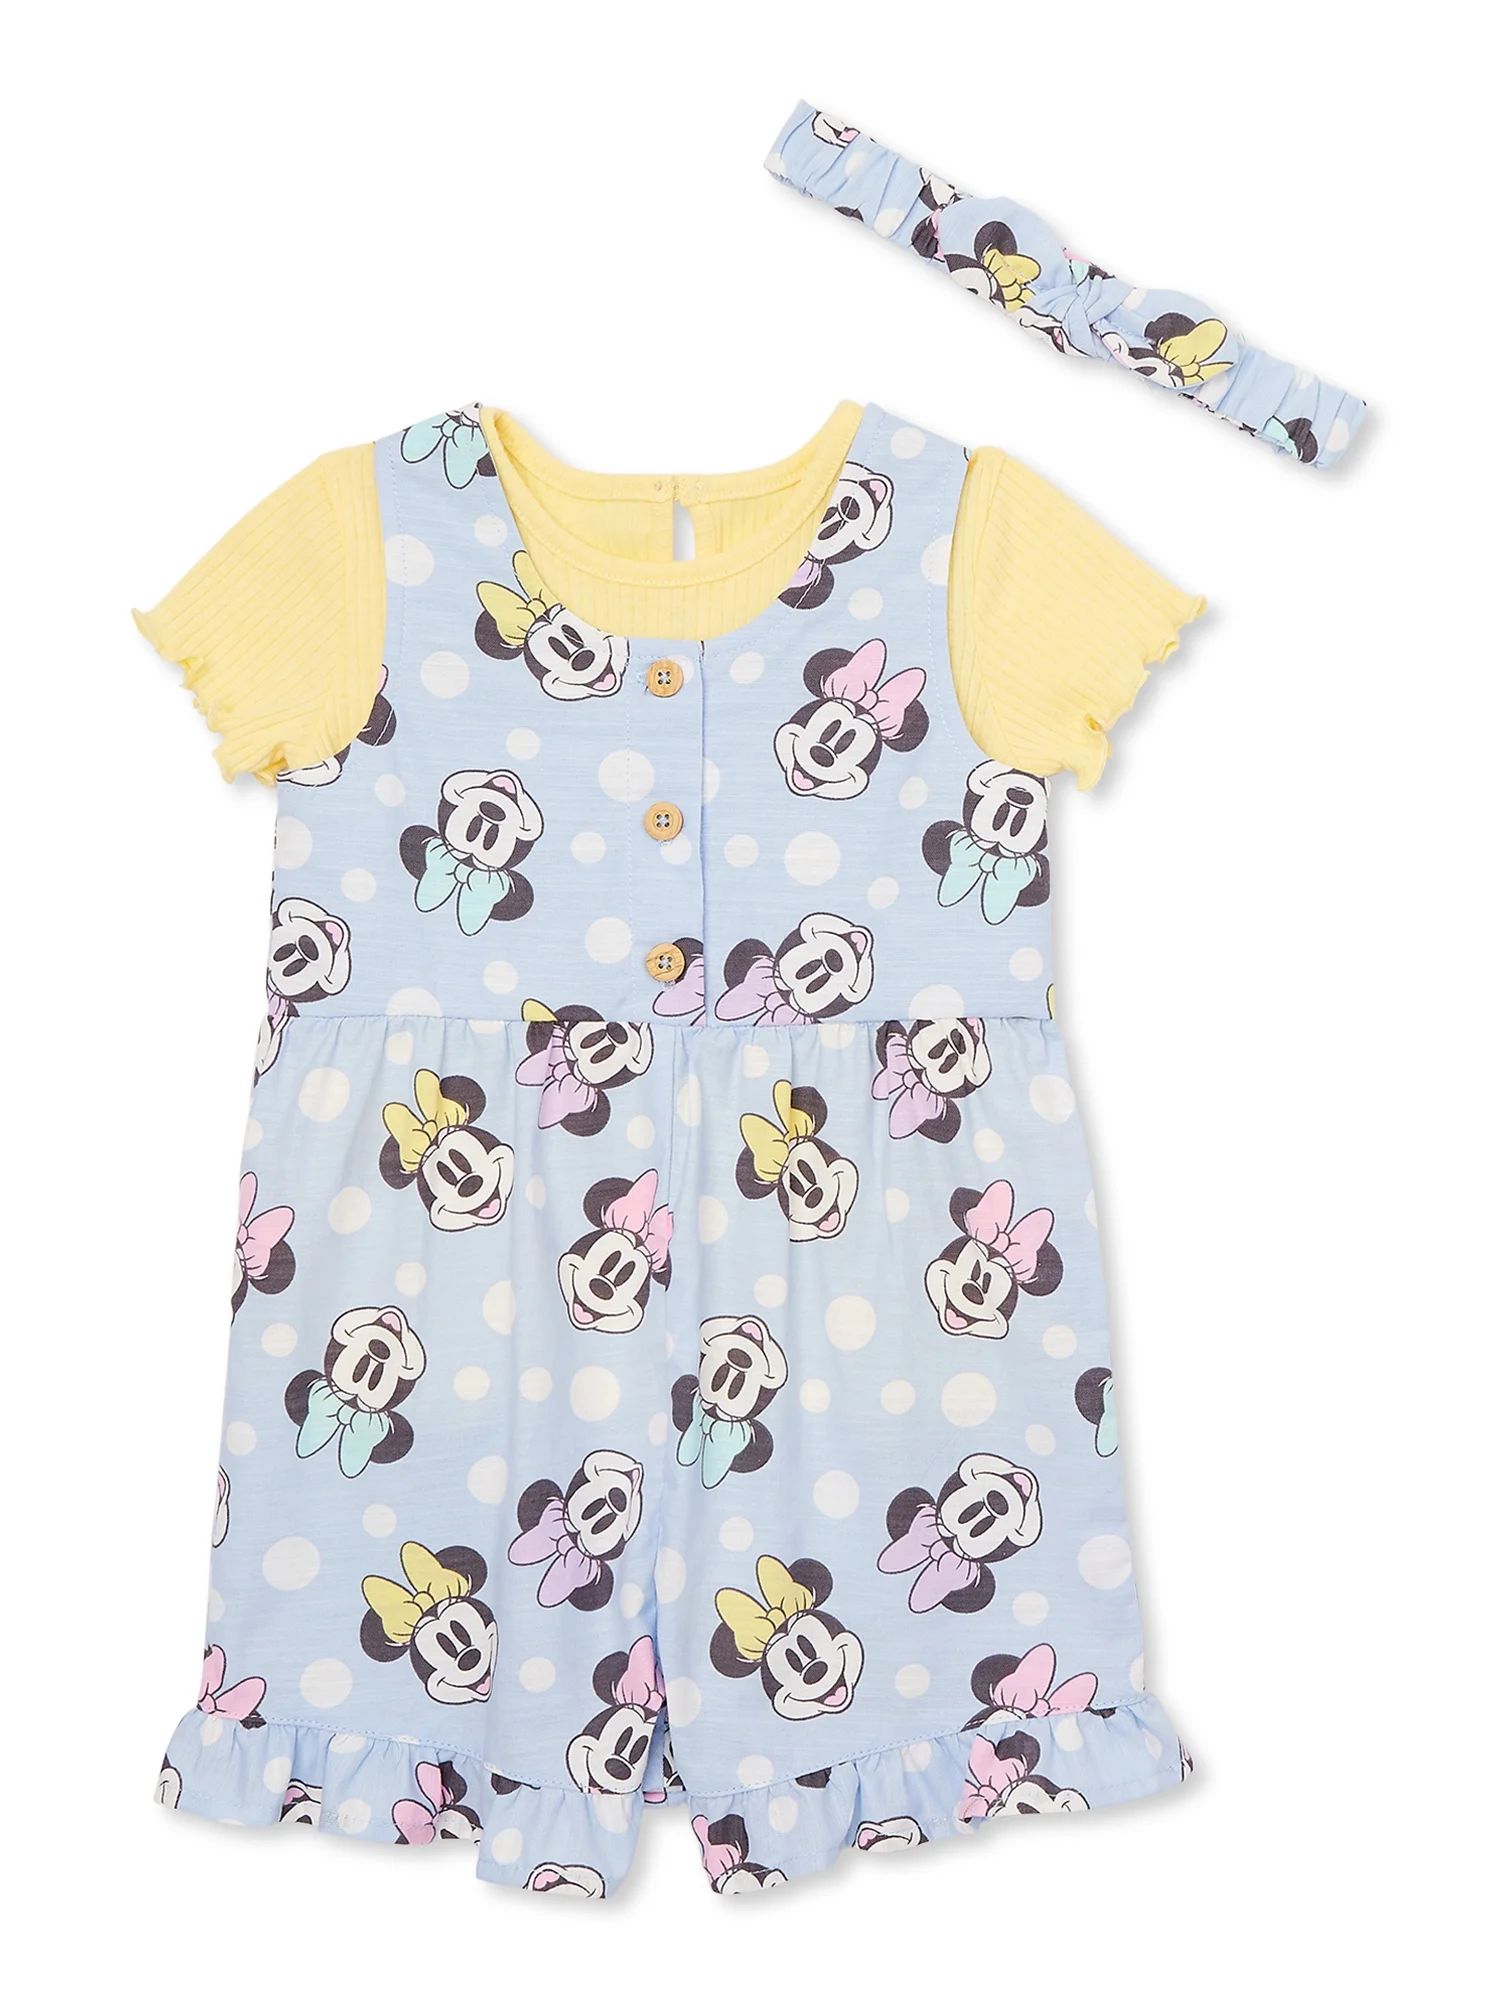 Minnie Mouse Baby Girl Shortall and Tee Outfit Set with Headband, Sizes 0/3M-24M | Walmart (US)